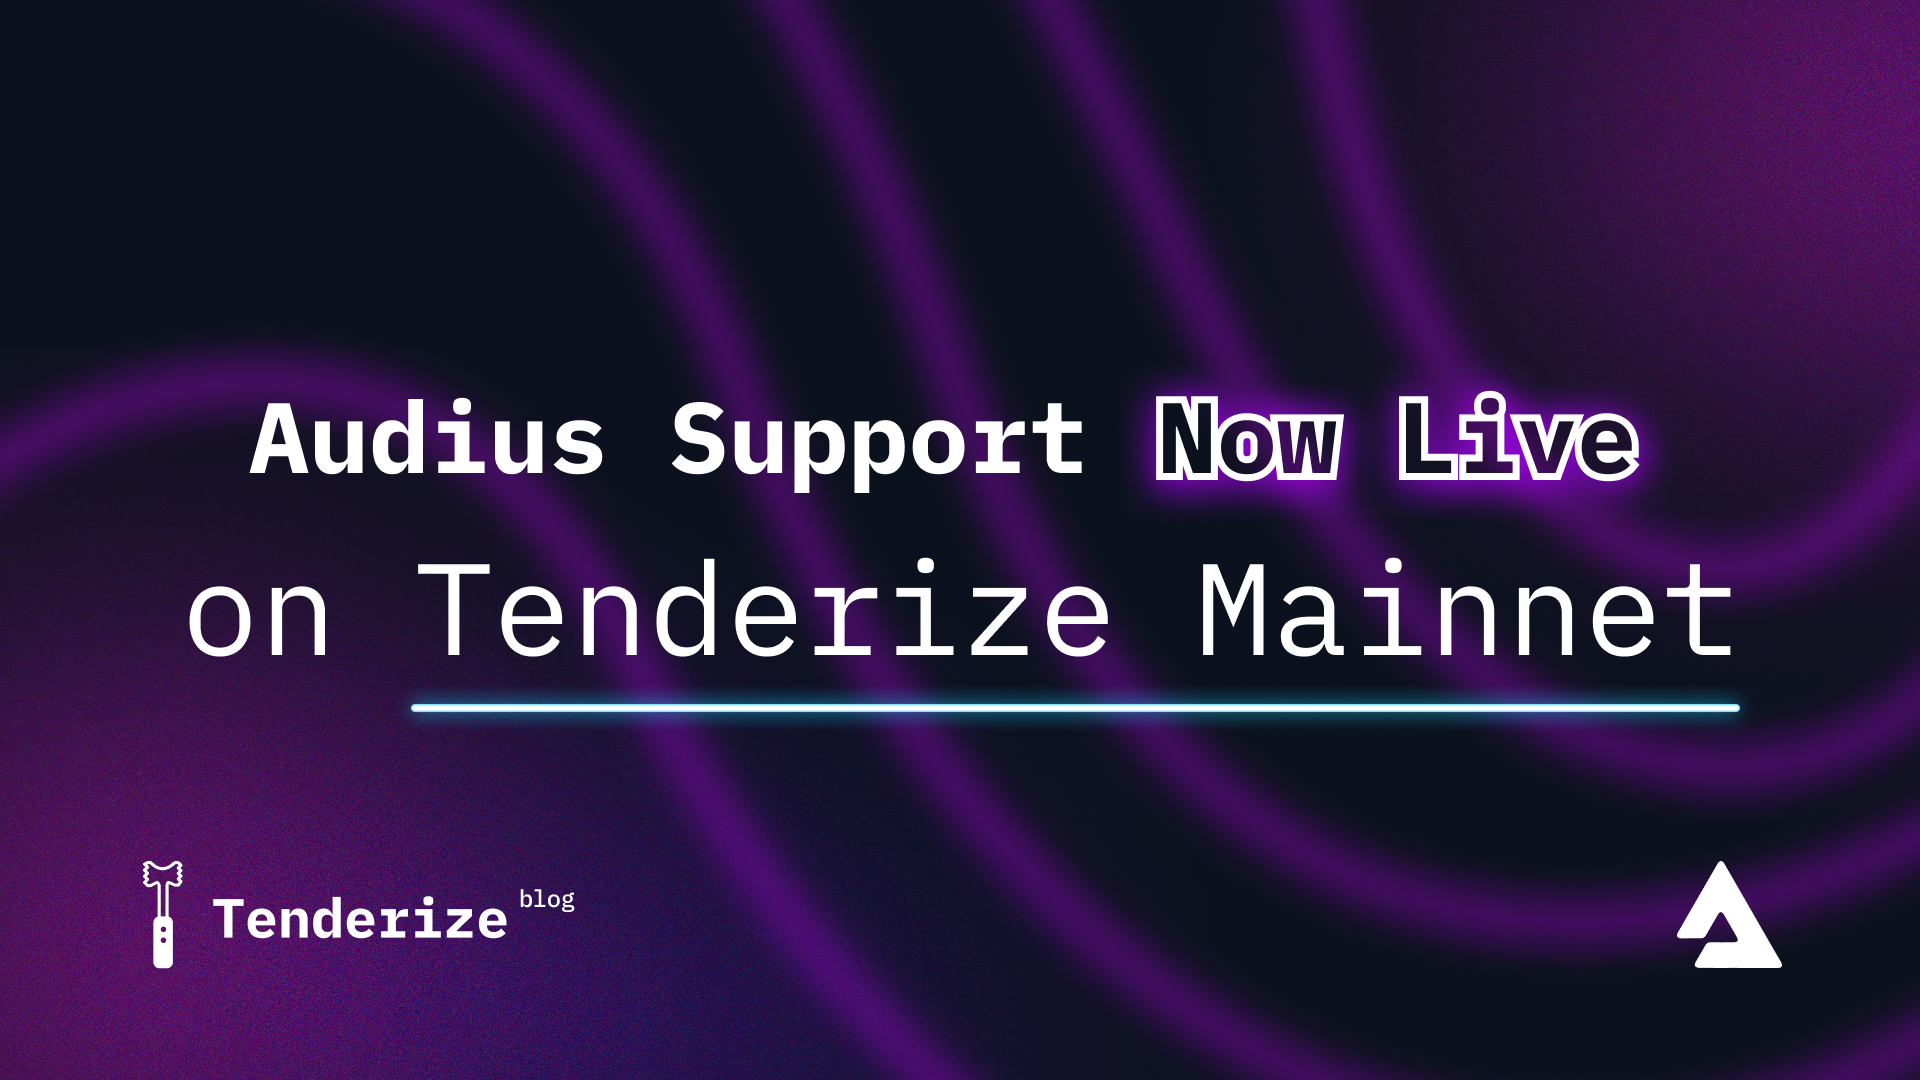 Audius Support Now Live on Tenderize Mainnet!